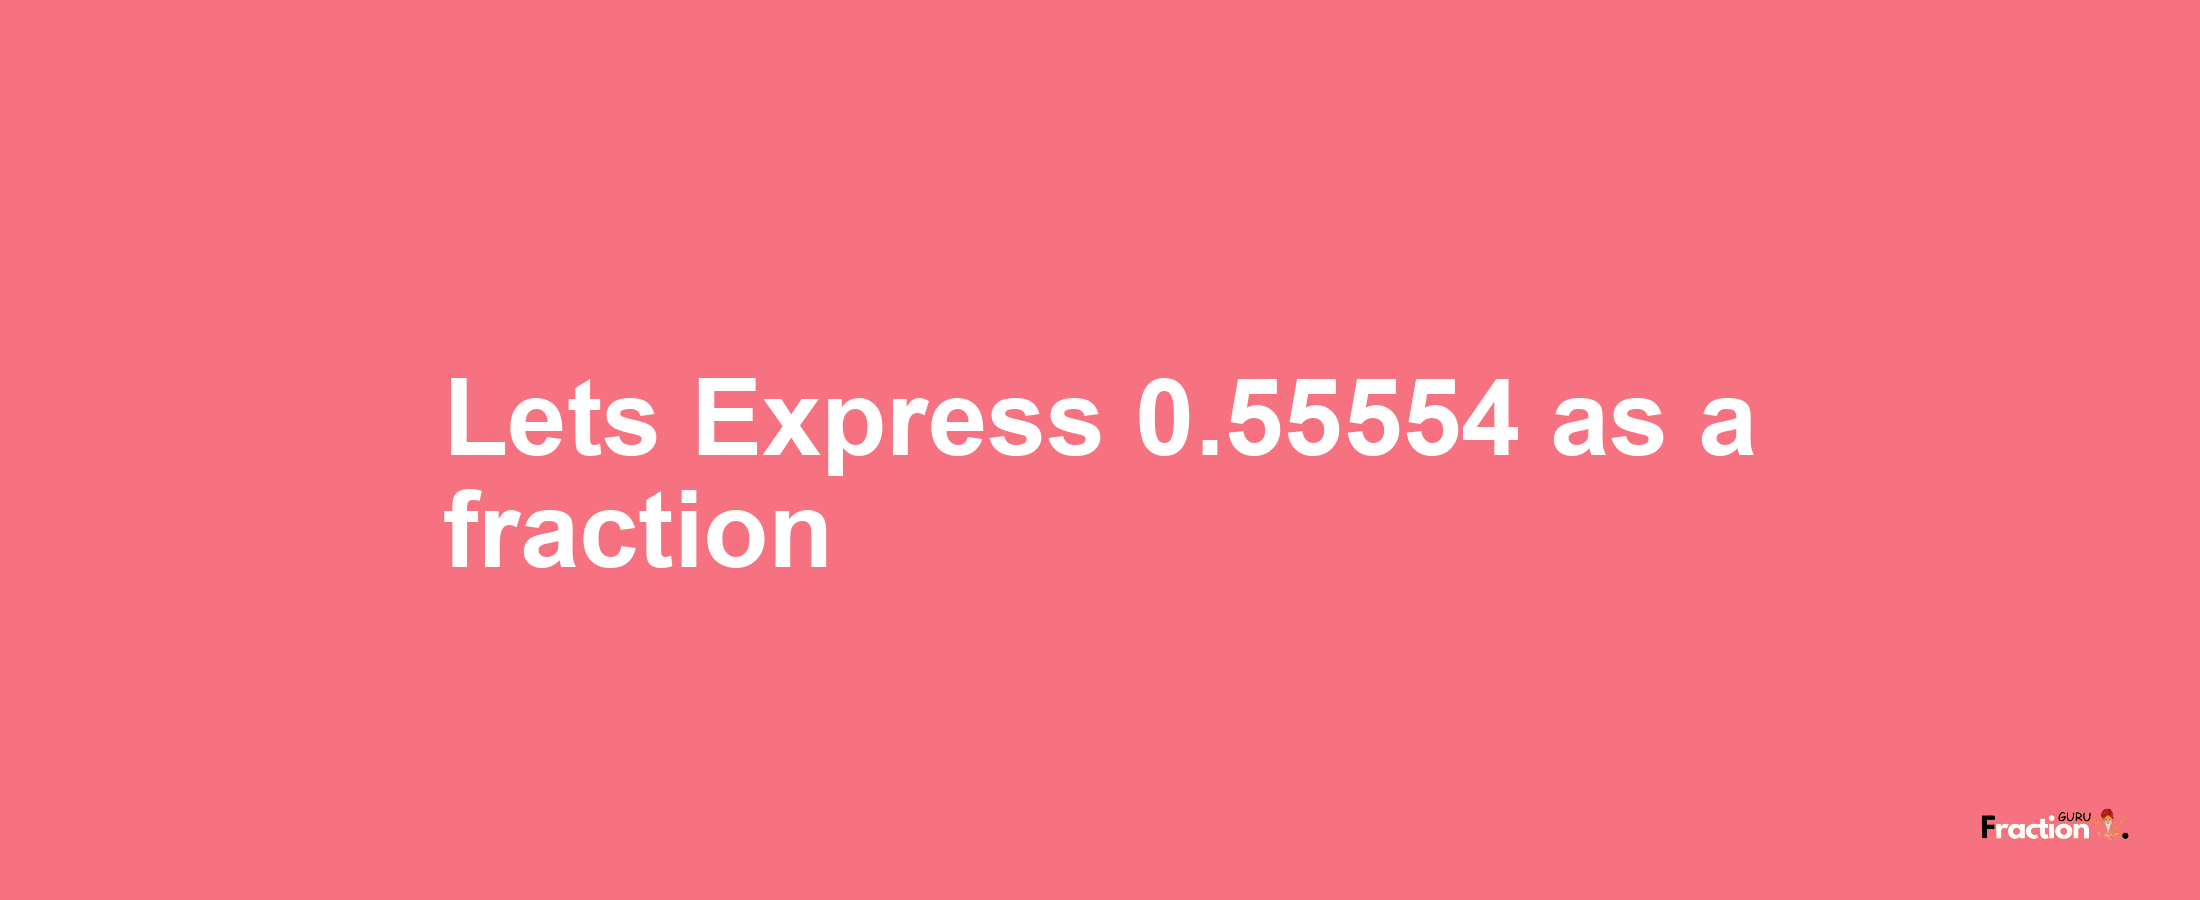 Lets Express 0.55554 as afraction